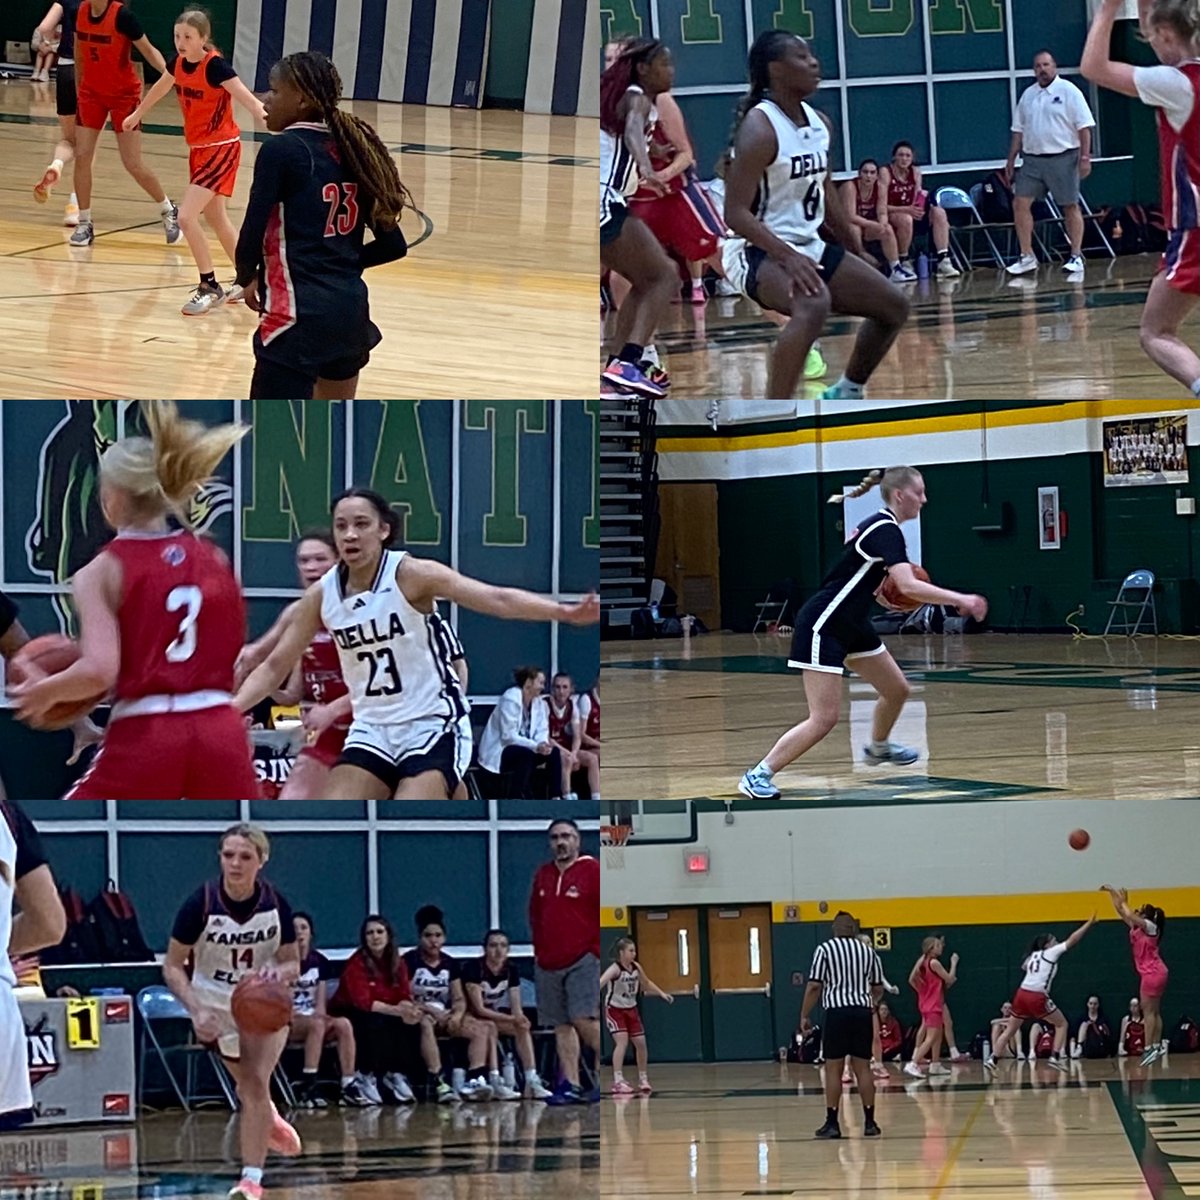 Happy to get the chance to see some of our Staley Falcons on the court with their club teams. Keep working ladies! Proud of your effort and energy today!